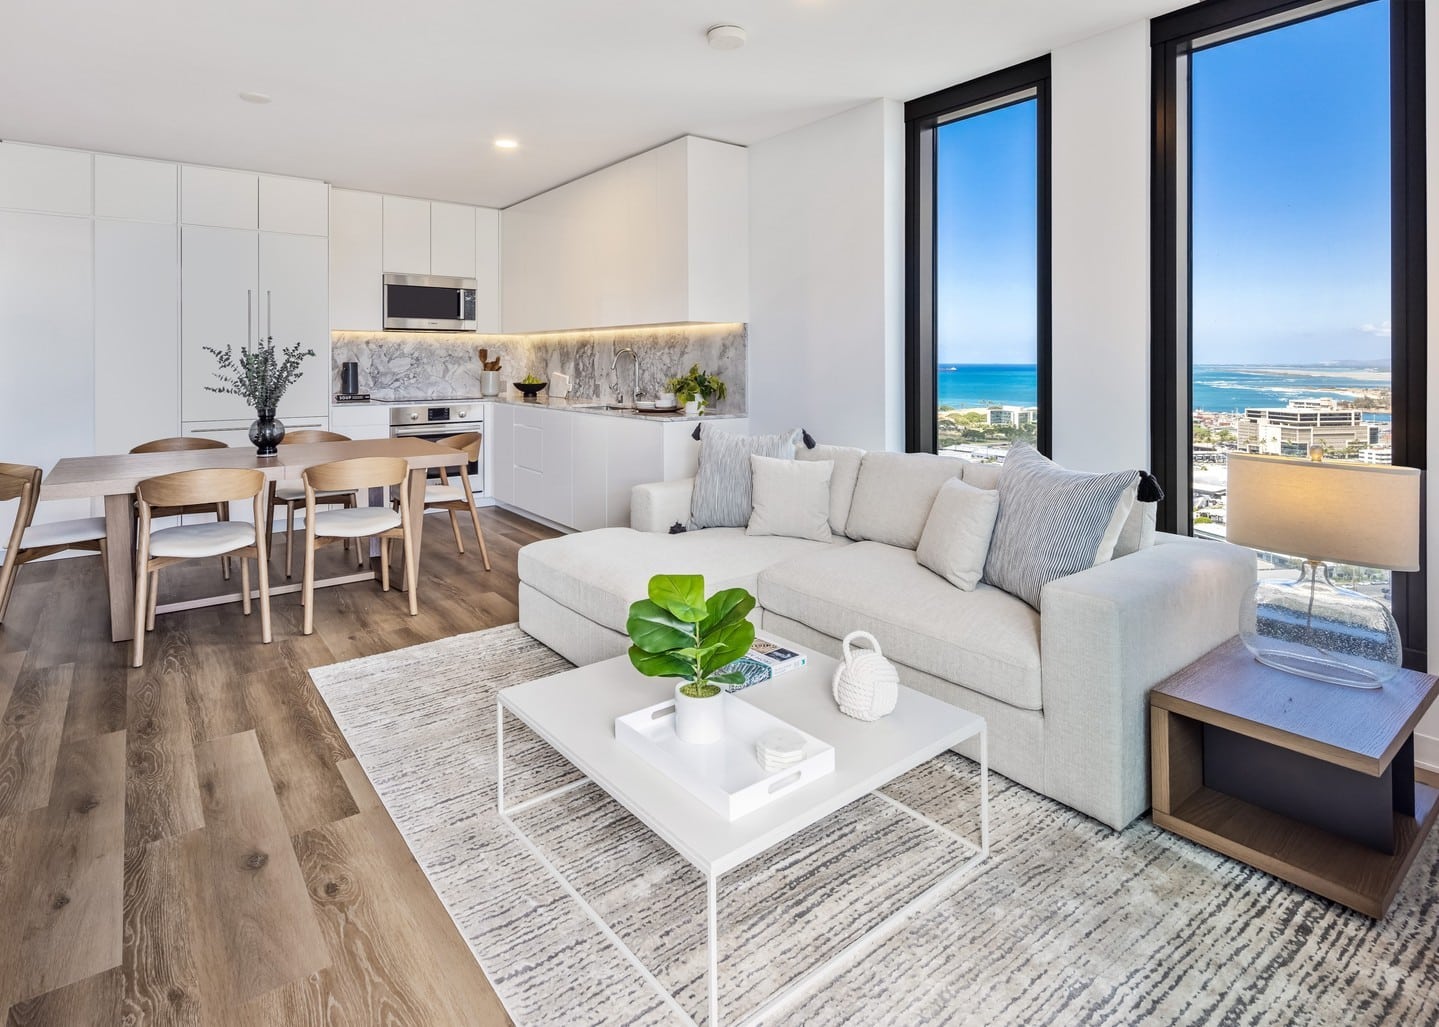 At ‘A‘ali‘i, experience modern kitchens with island views and premium finishes by renowned interior designer @lrottet. Learn more about these furnished, move-in ready residences at the link in our bio.